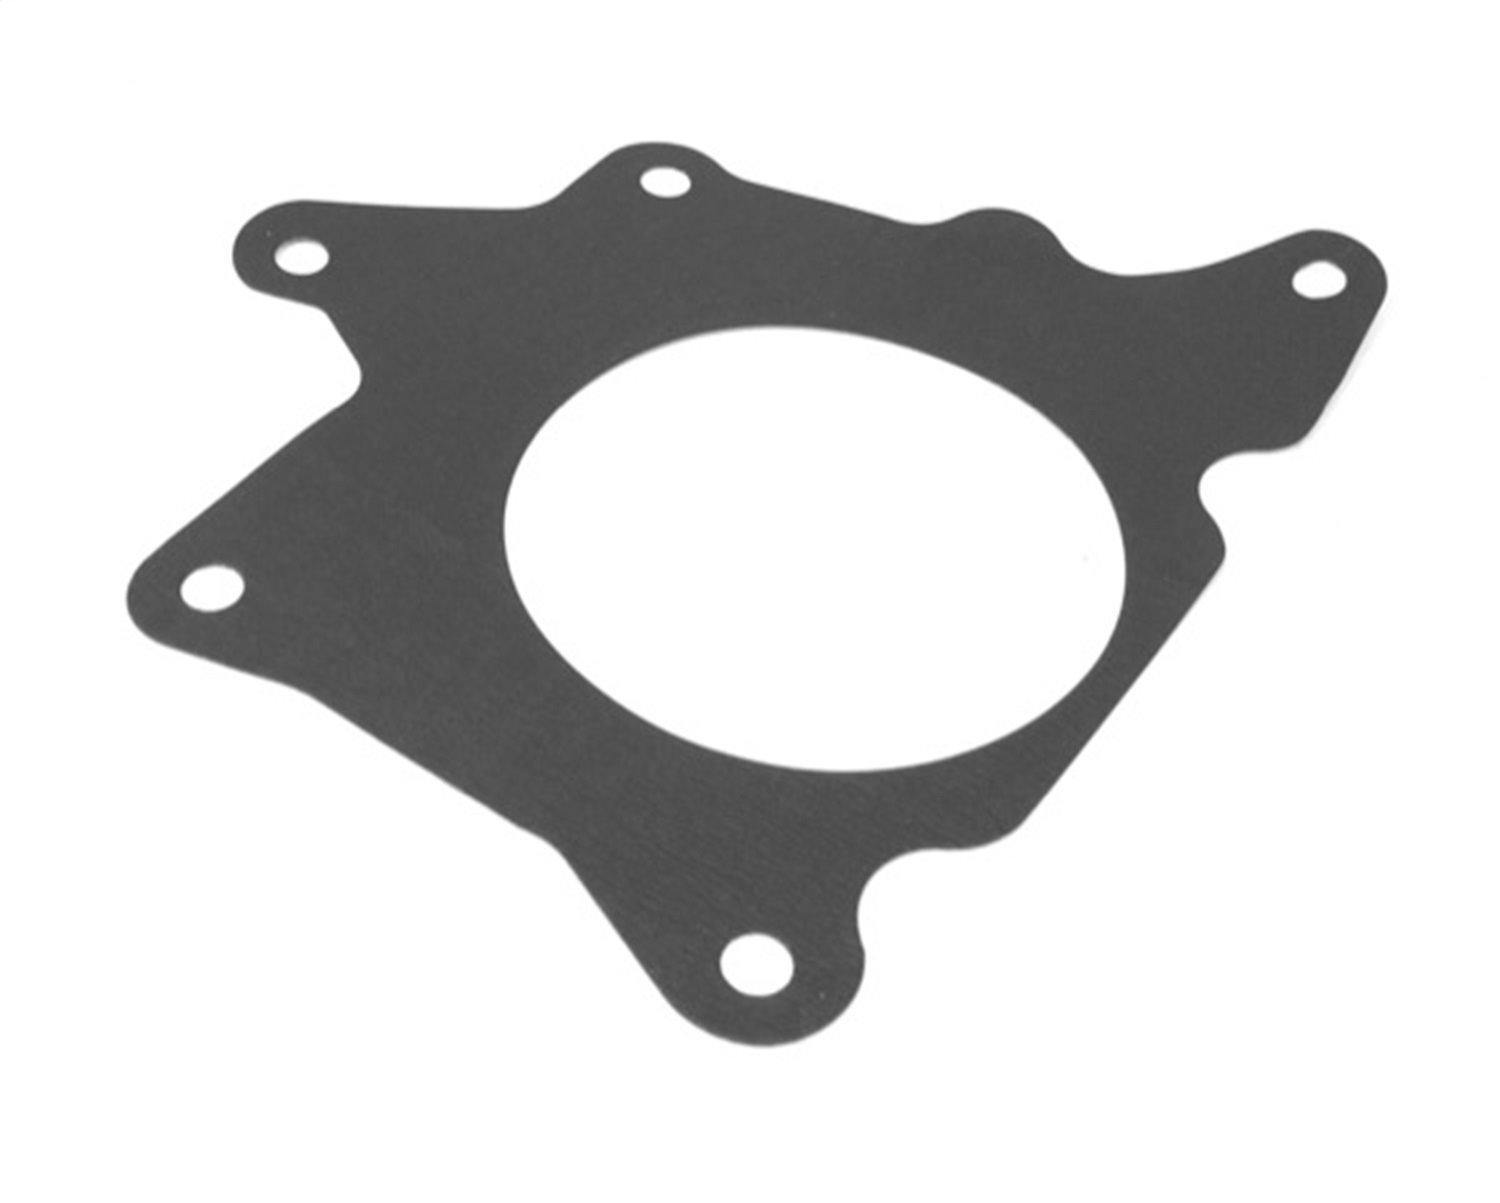 This transfer case gasket from Omix-ADA mates the transfer case to a T-18 transmission on 67-71 Jeep